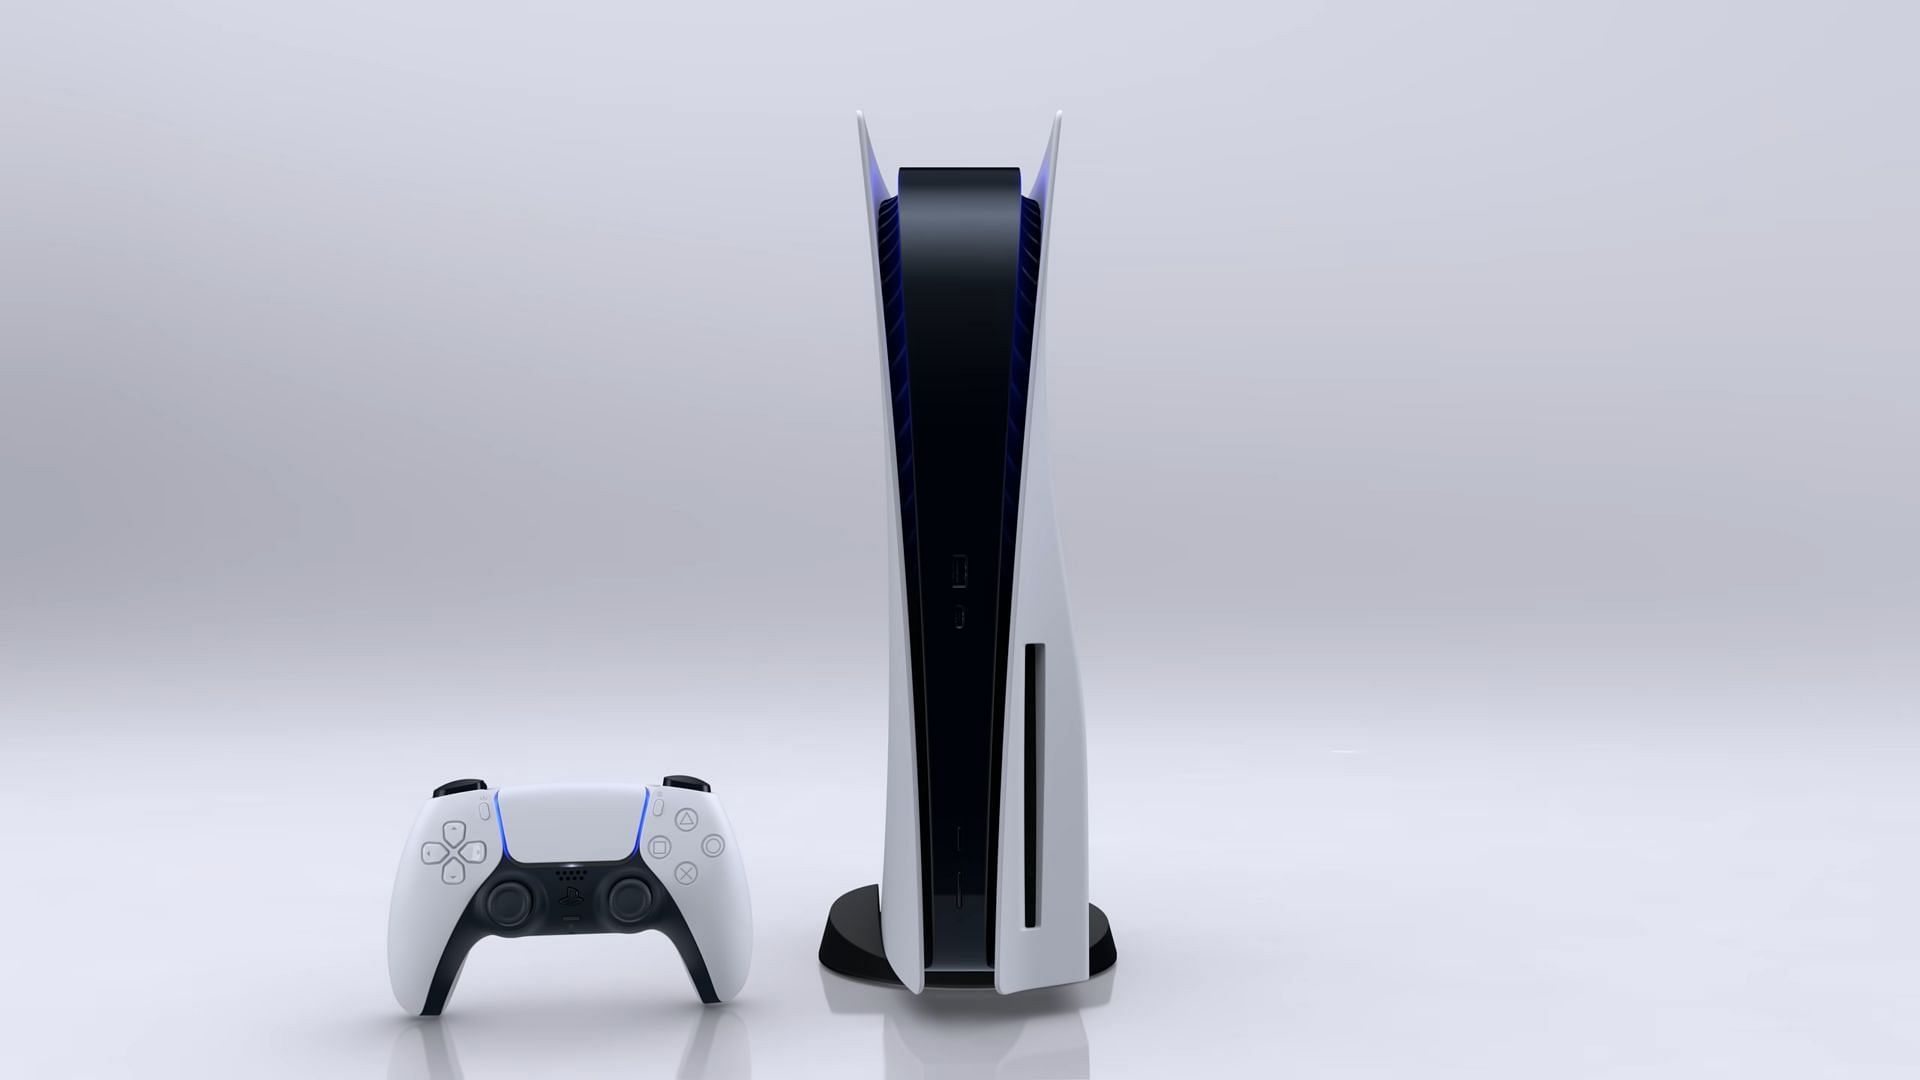 Picture of The PlayStation 5 console with the new Dual Sense controller